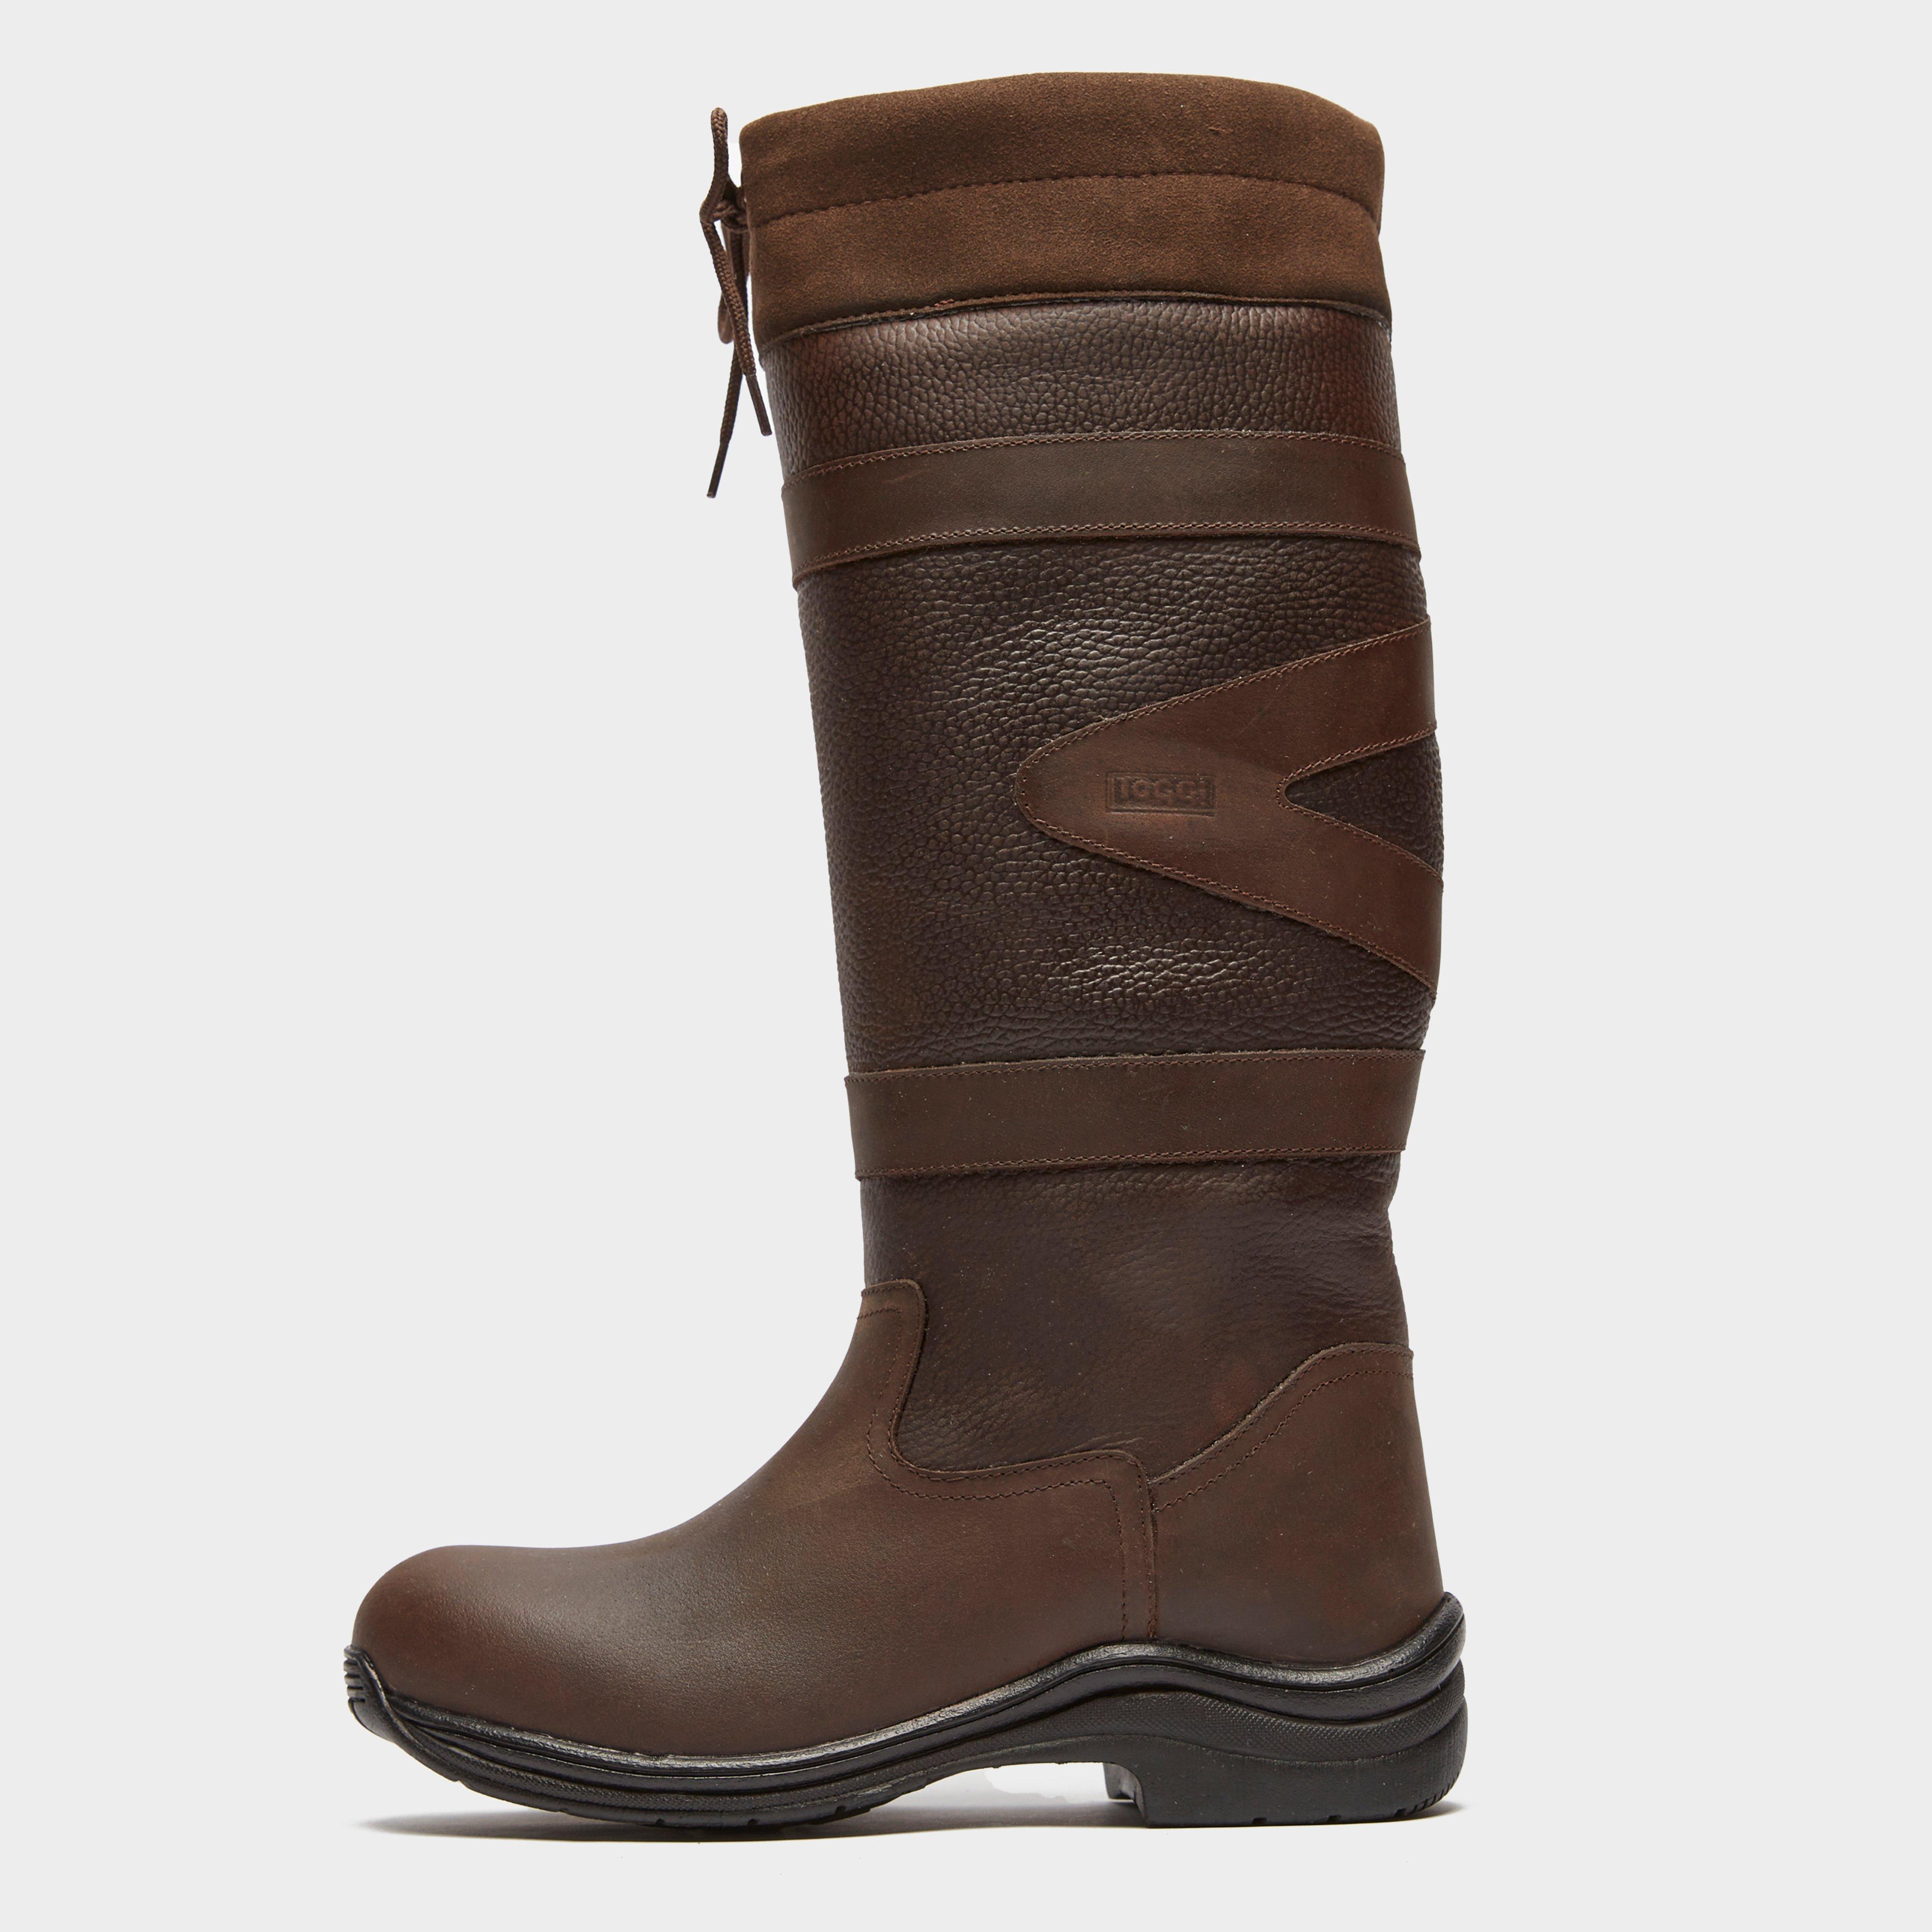 Toggi Womens Canyon Riding Boots - Brown/brown  Brown/brown